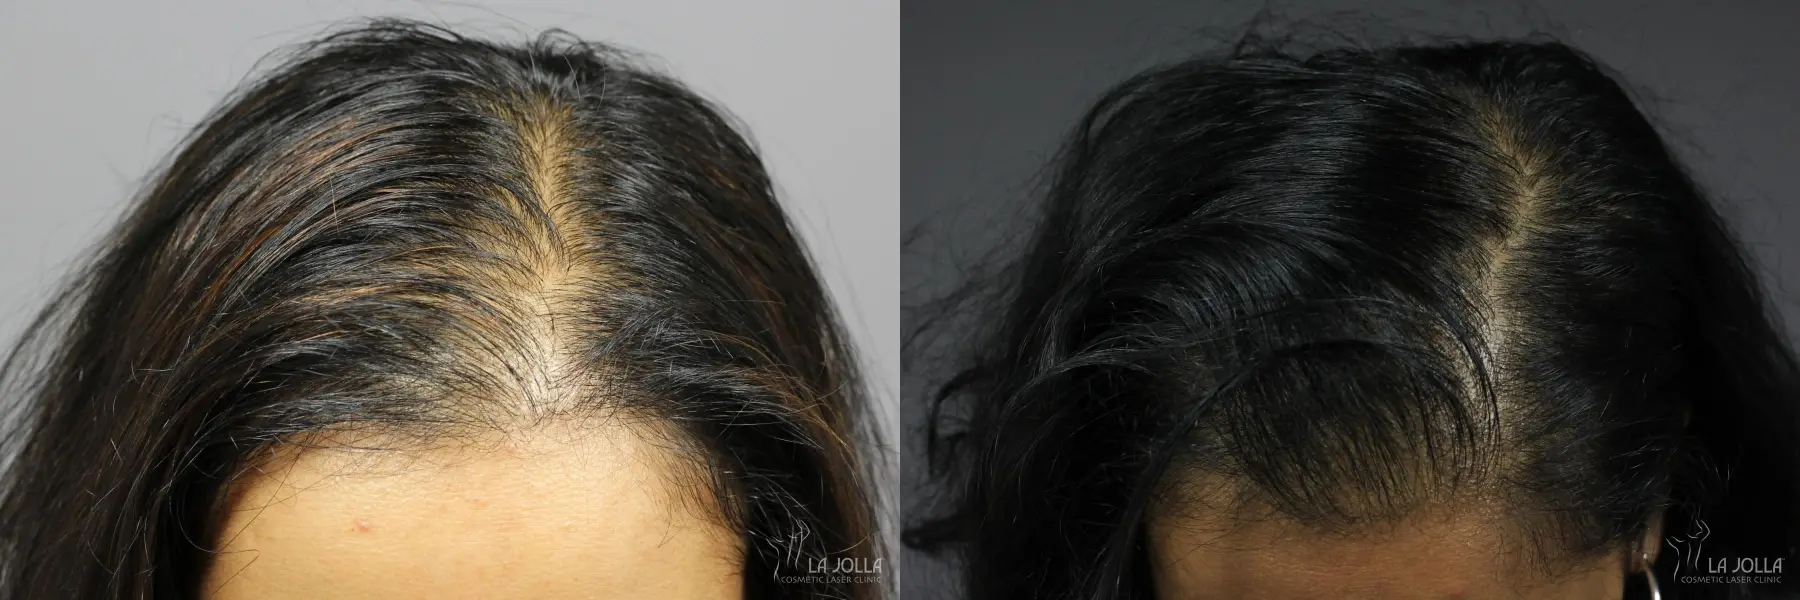 Hair Restoration: Patient 8 - Before and After 1